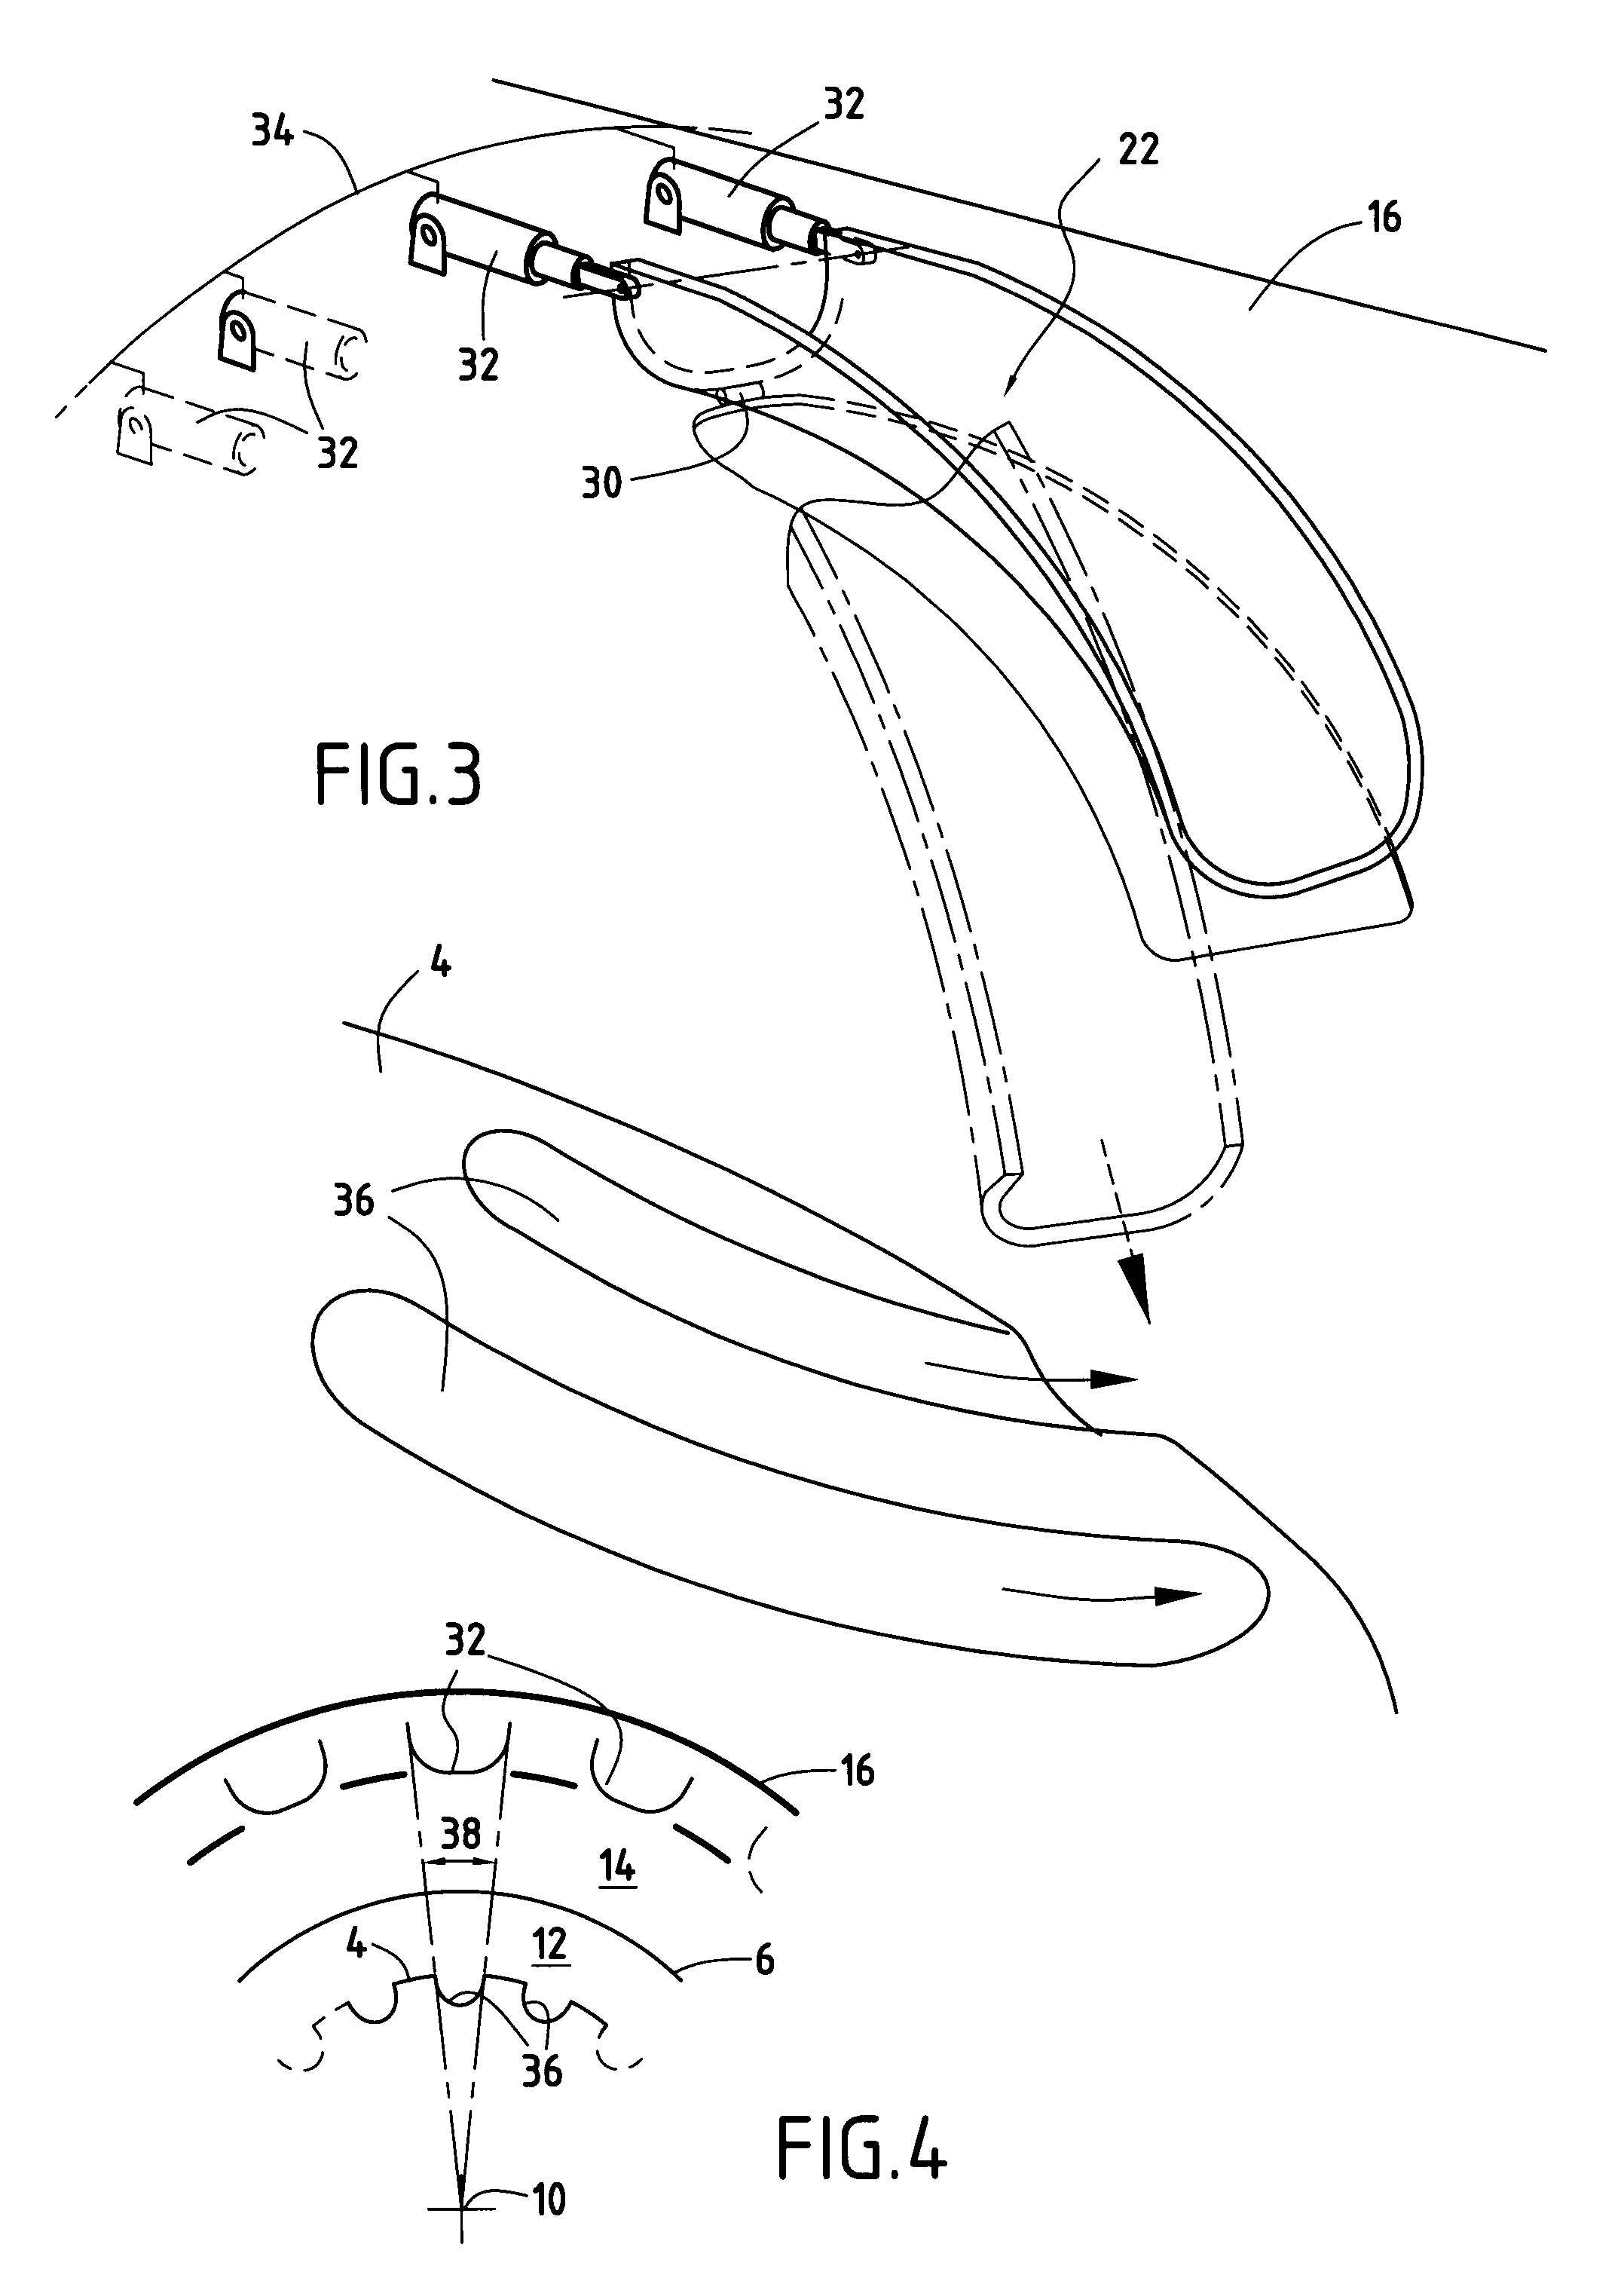 Variable-section flow mixer for a double-flow turbojet for a supersonic airplane